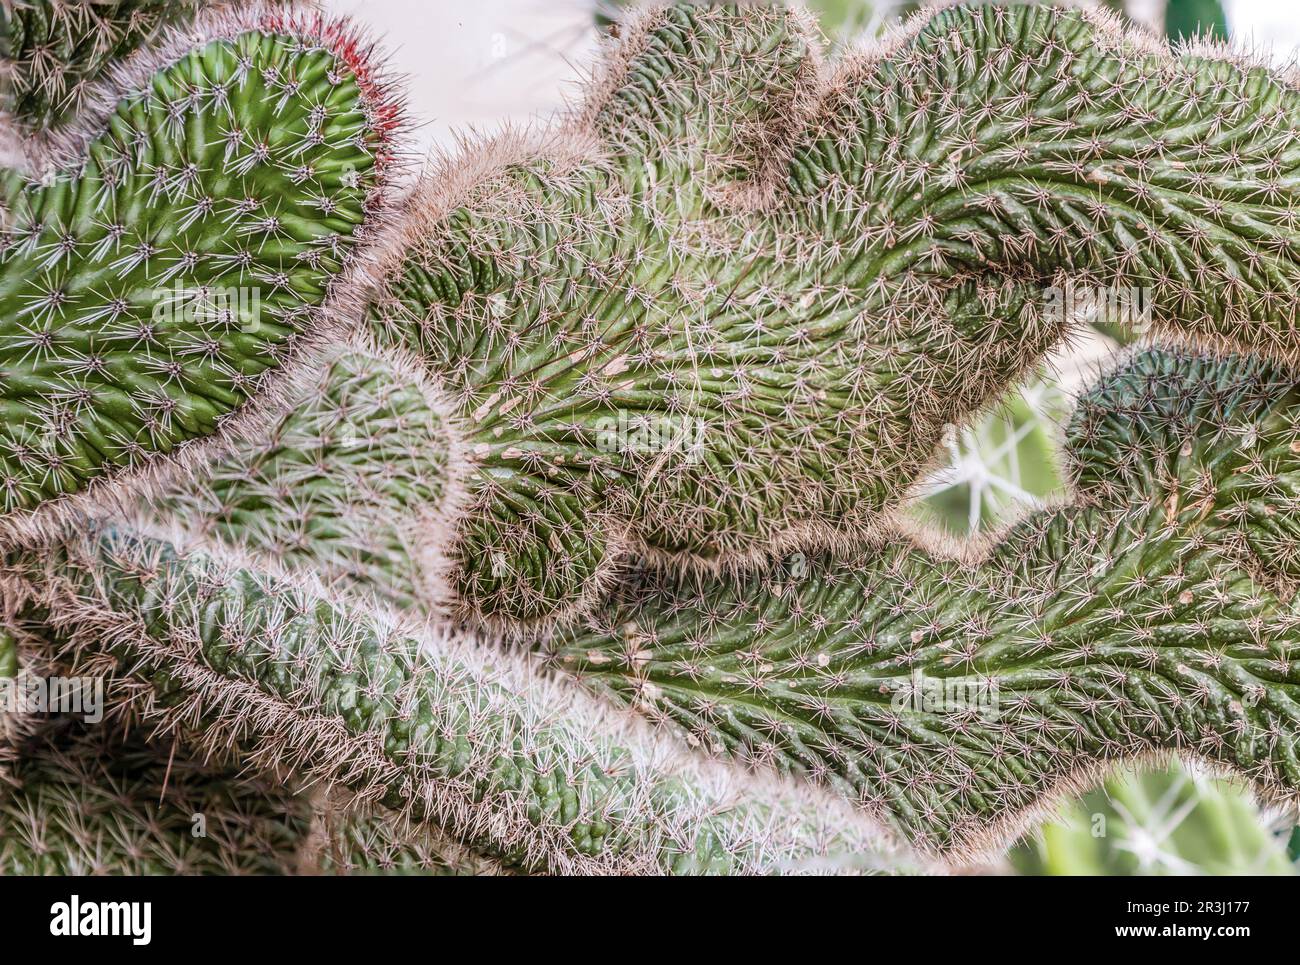 Crested green cactus Stock Photo